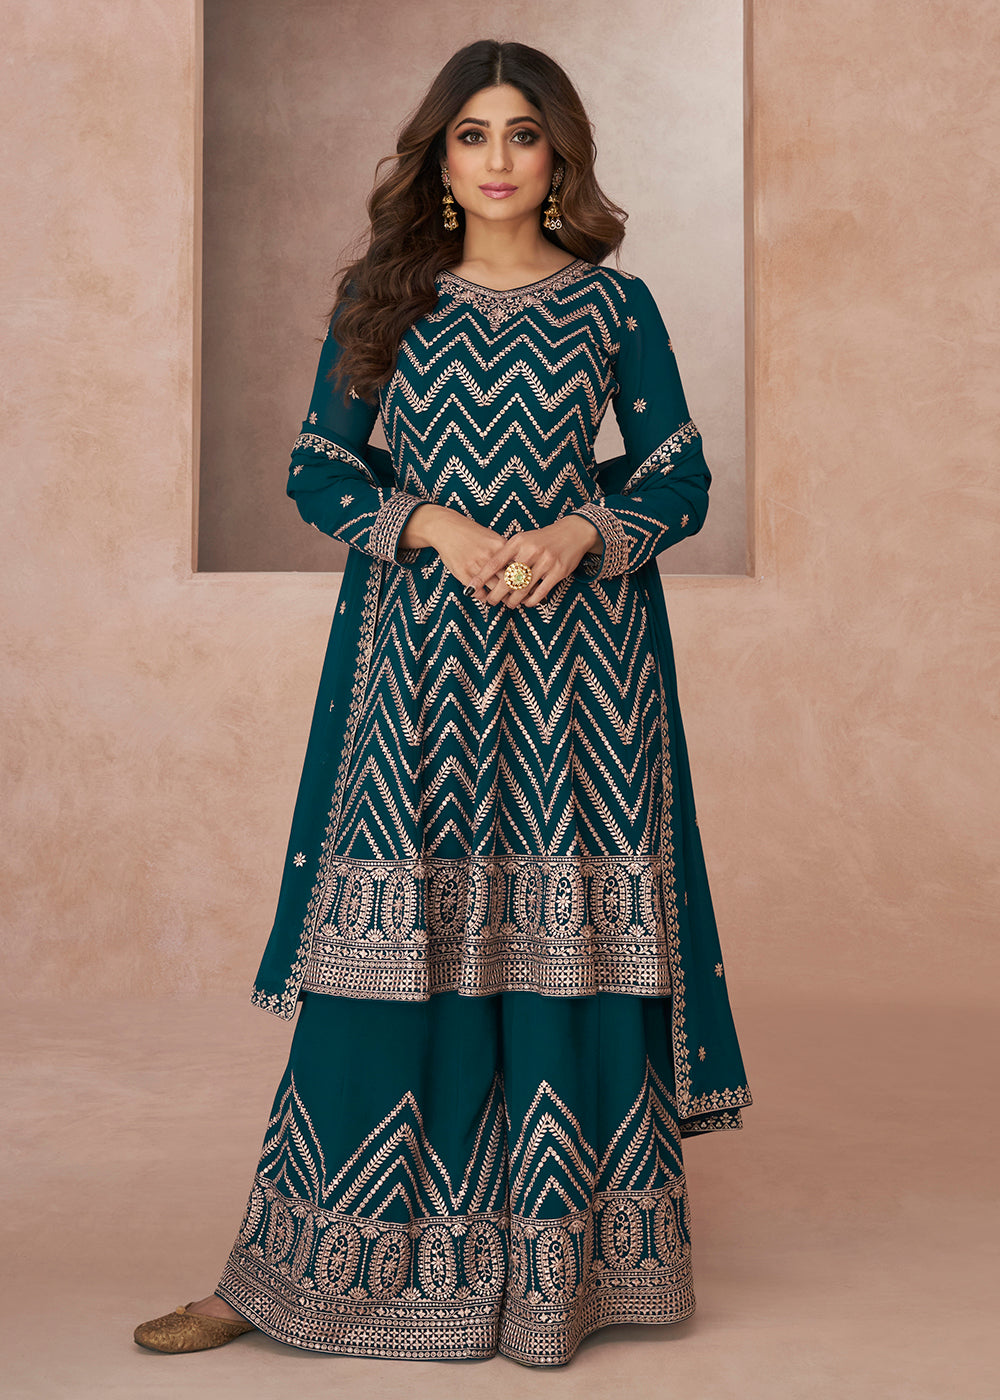 Buy Now Charming Festive Look Teal Georgette Palazzo Style Suit Online in USA, UK, Canada, Germany, Australia & Worldwide at Empress Clothing.